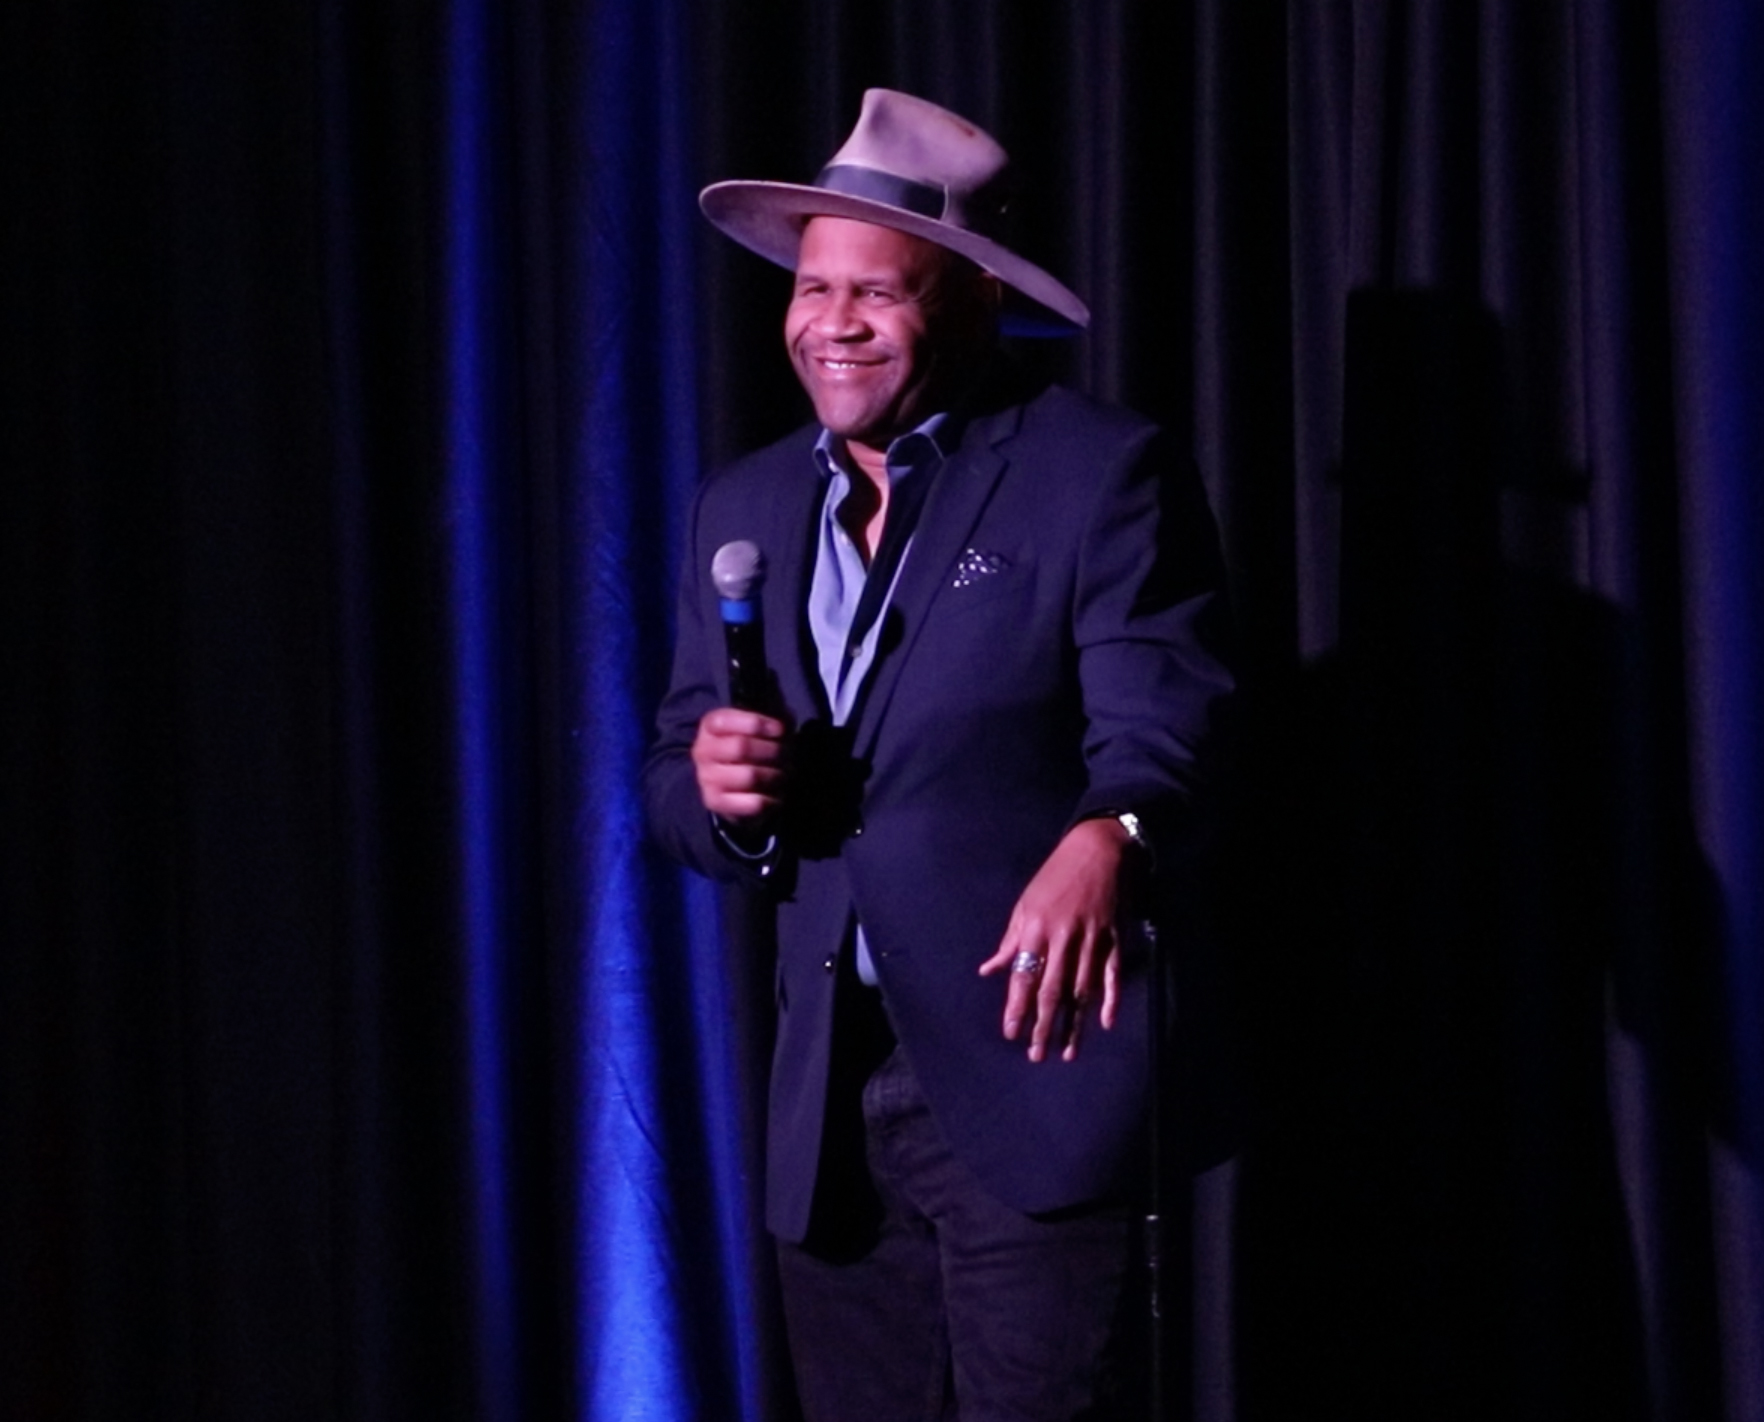 Rondell Sheridan comes to Delirious Comedy Club